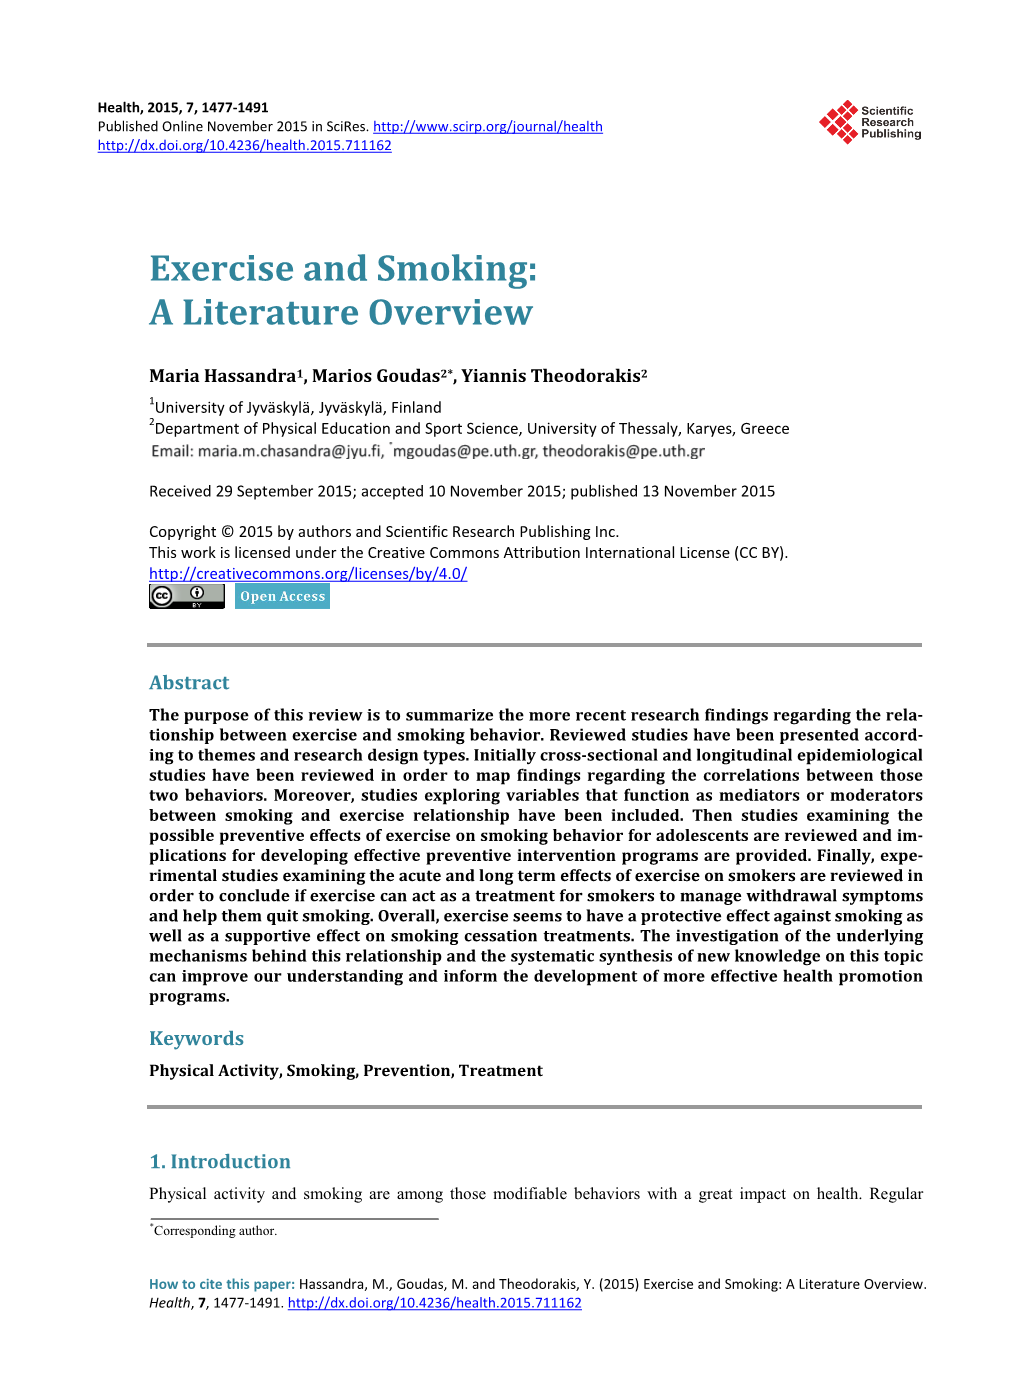 Exercise and Smoking: a Literature Overview